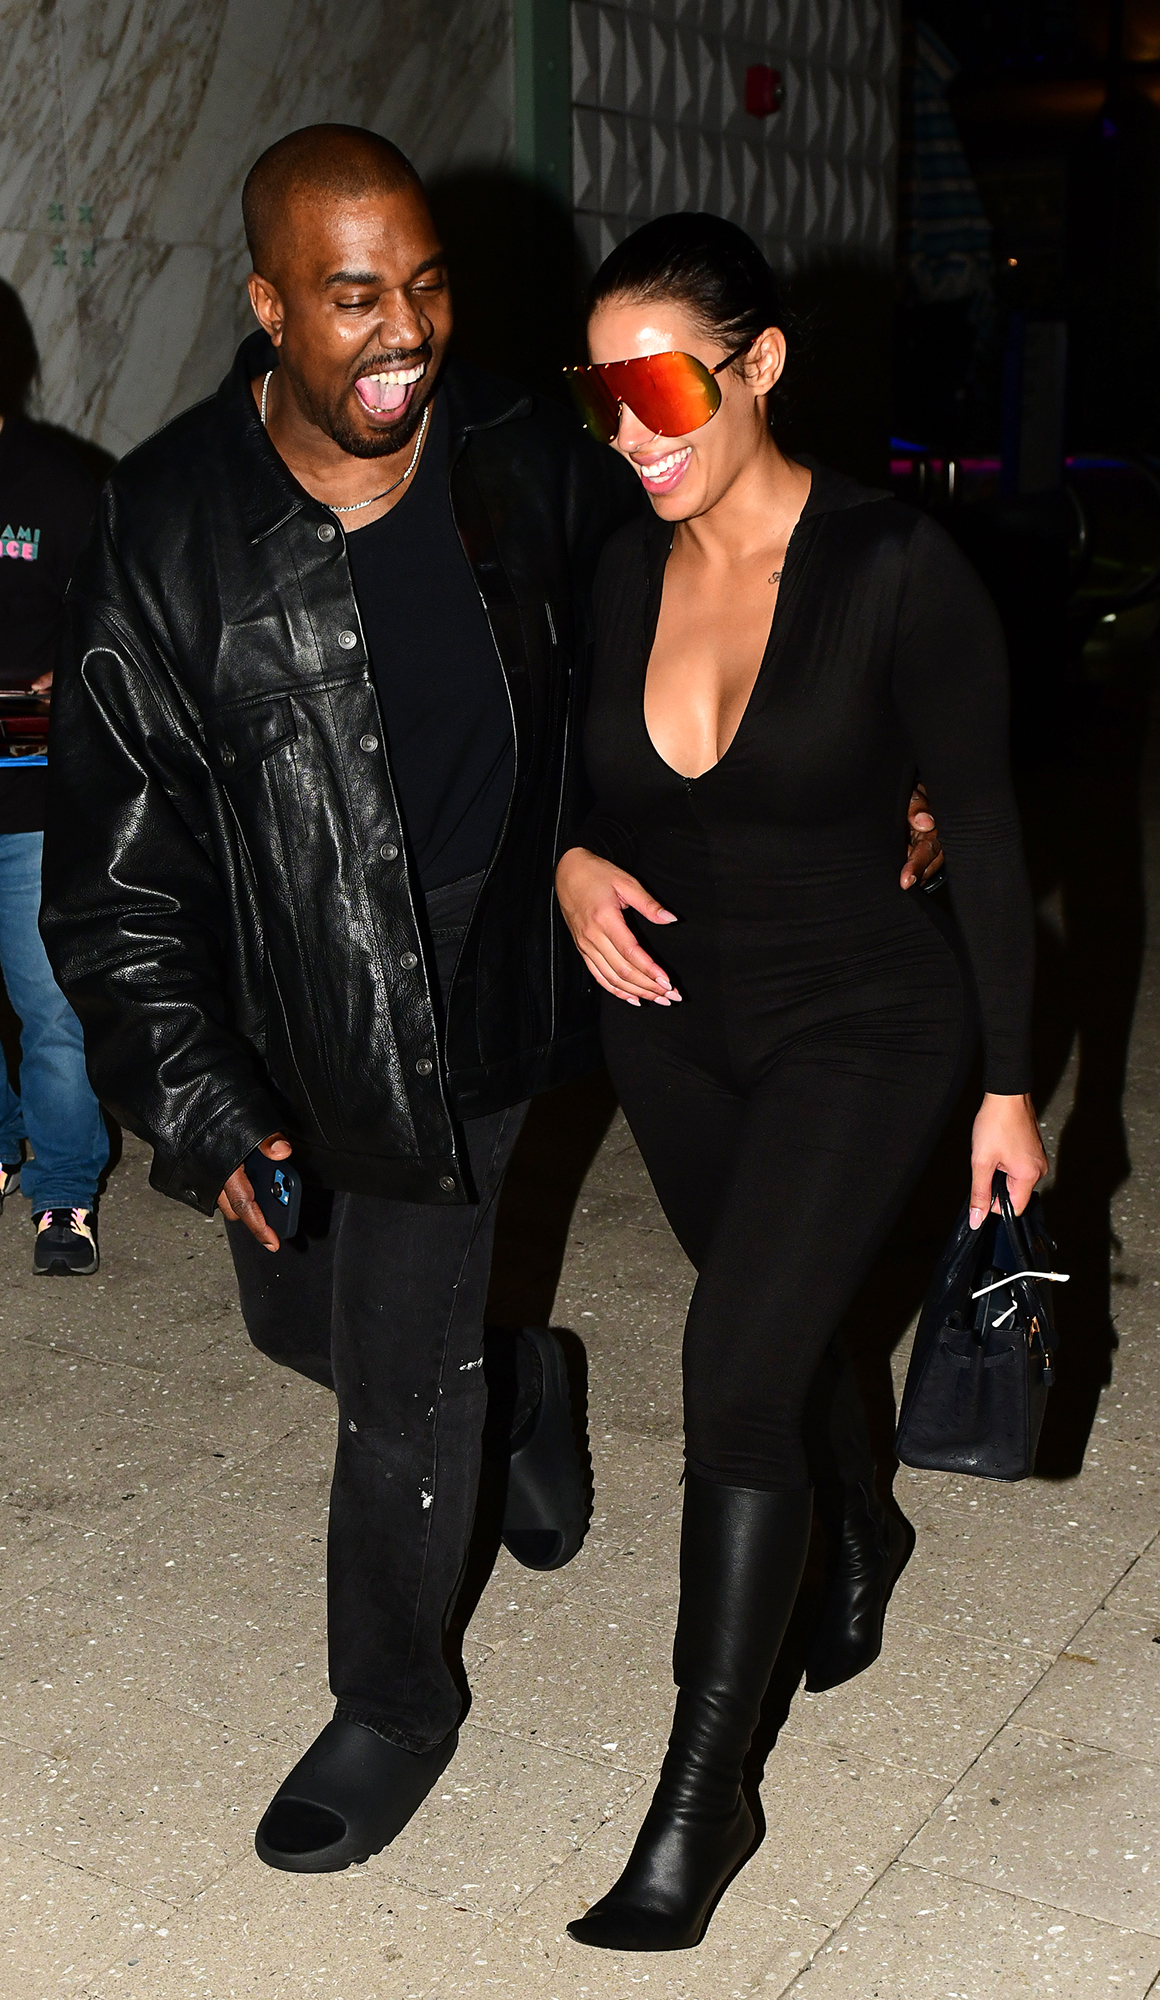 Kanye West appears to confirm new romance with Chaney Jones